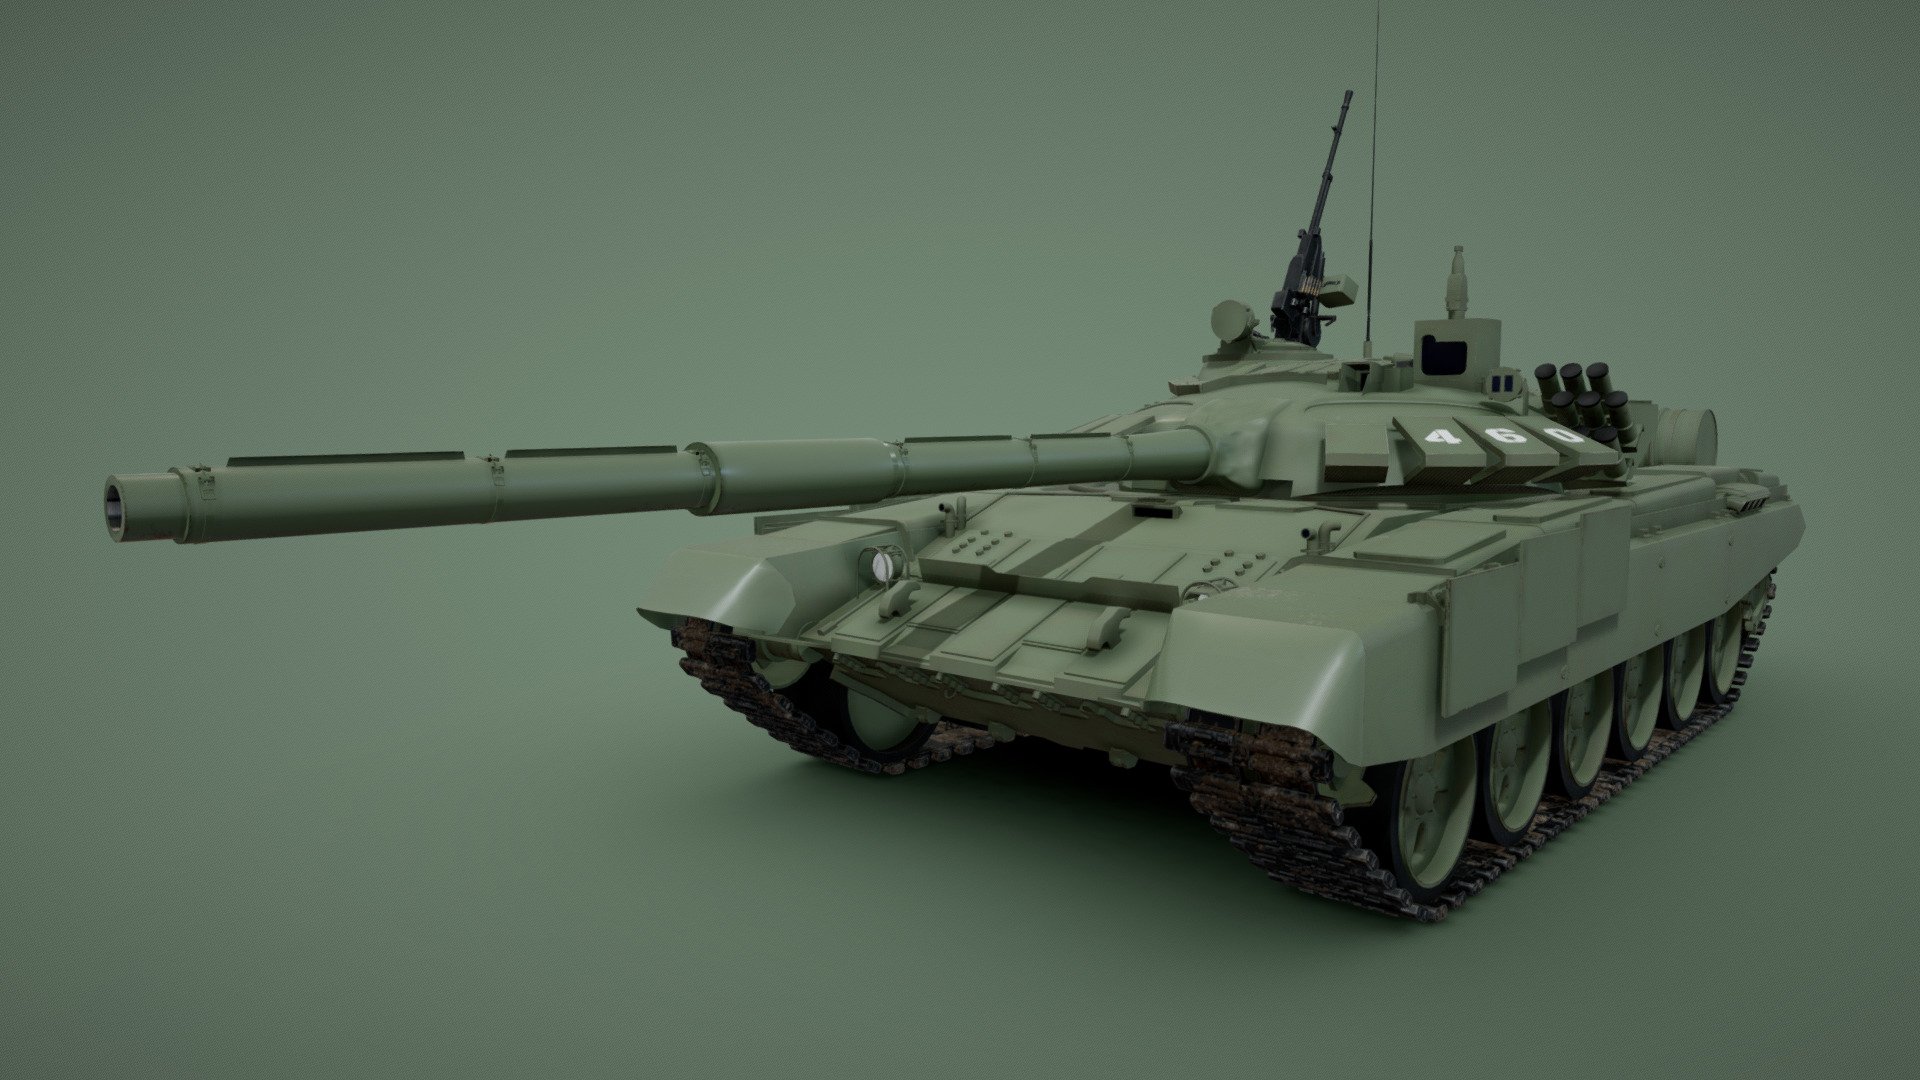 The T-72B3 is a recent Russian upgrade of the ageing T-72B tanks. It can be seen as a low-cost alternative to the T-72B2 Rogatka upgrade to keep older T-72B tanks operational. Refurbished and upgraded T-72B3 tanks are fitted with new engine, new gunners sight, new fire control system and have some other improvements. Now this MBT has a limited hunter-killer engagement capability. First upgraded T-72B3 tanks were delivered to the Russian Army in 2013. By 2020 a total of 558 tanks were upgraded to the T-72B3 standard 3d model